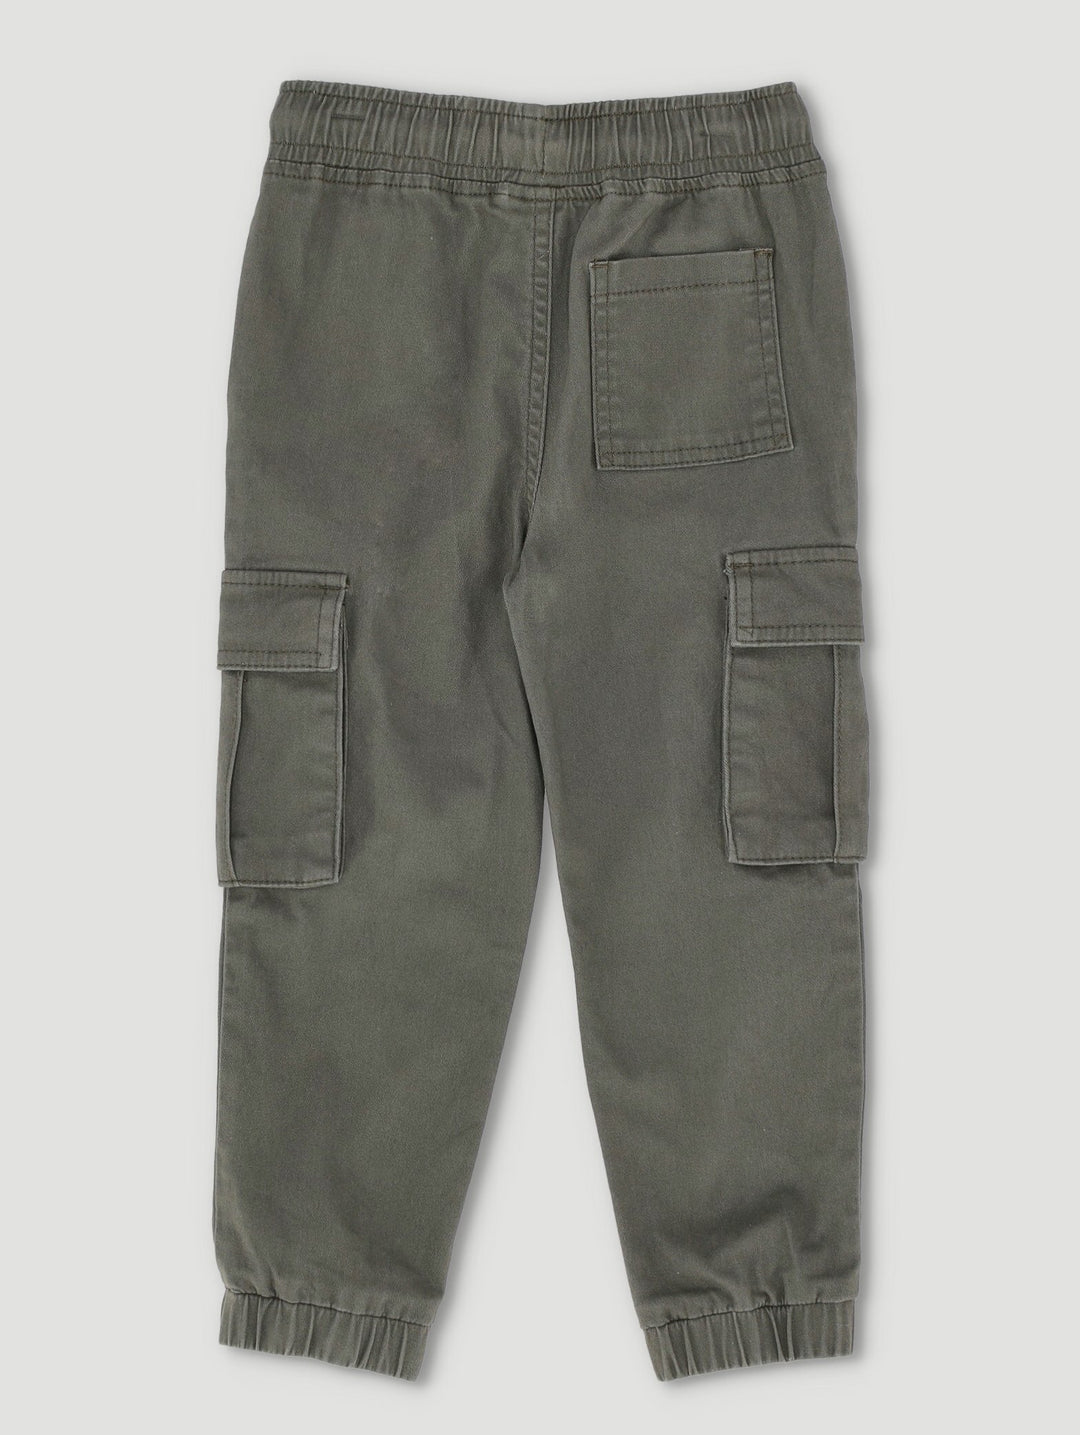 Pre-Boys Bellow Pockets Twill Jogger -  Olive